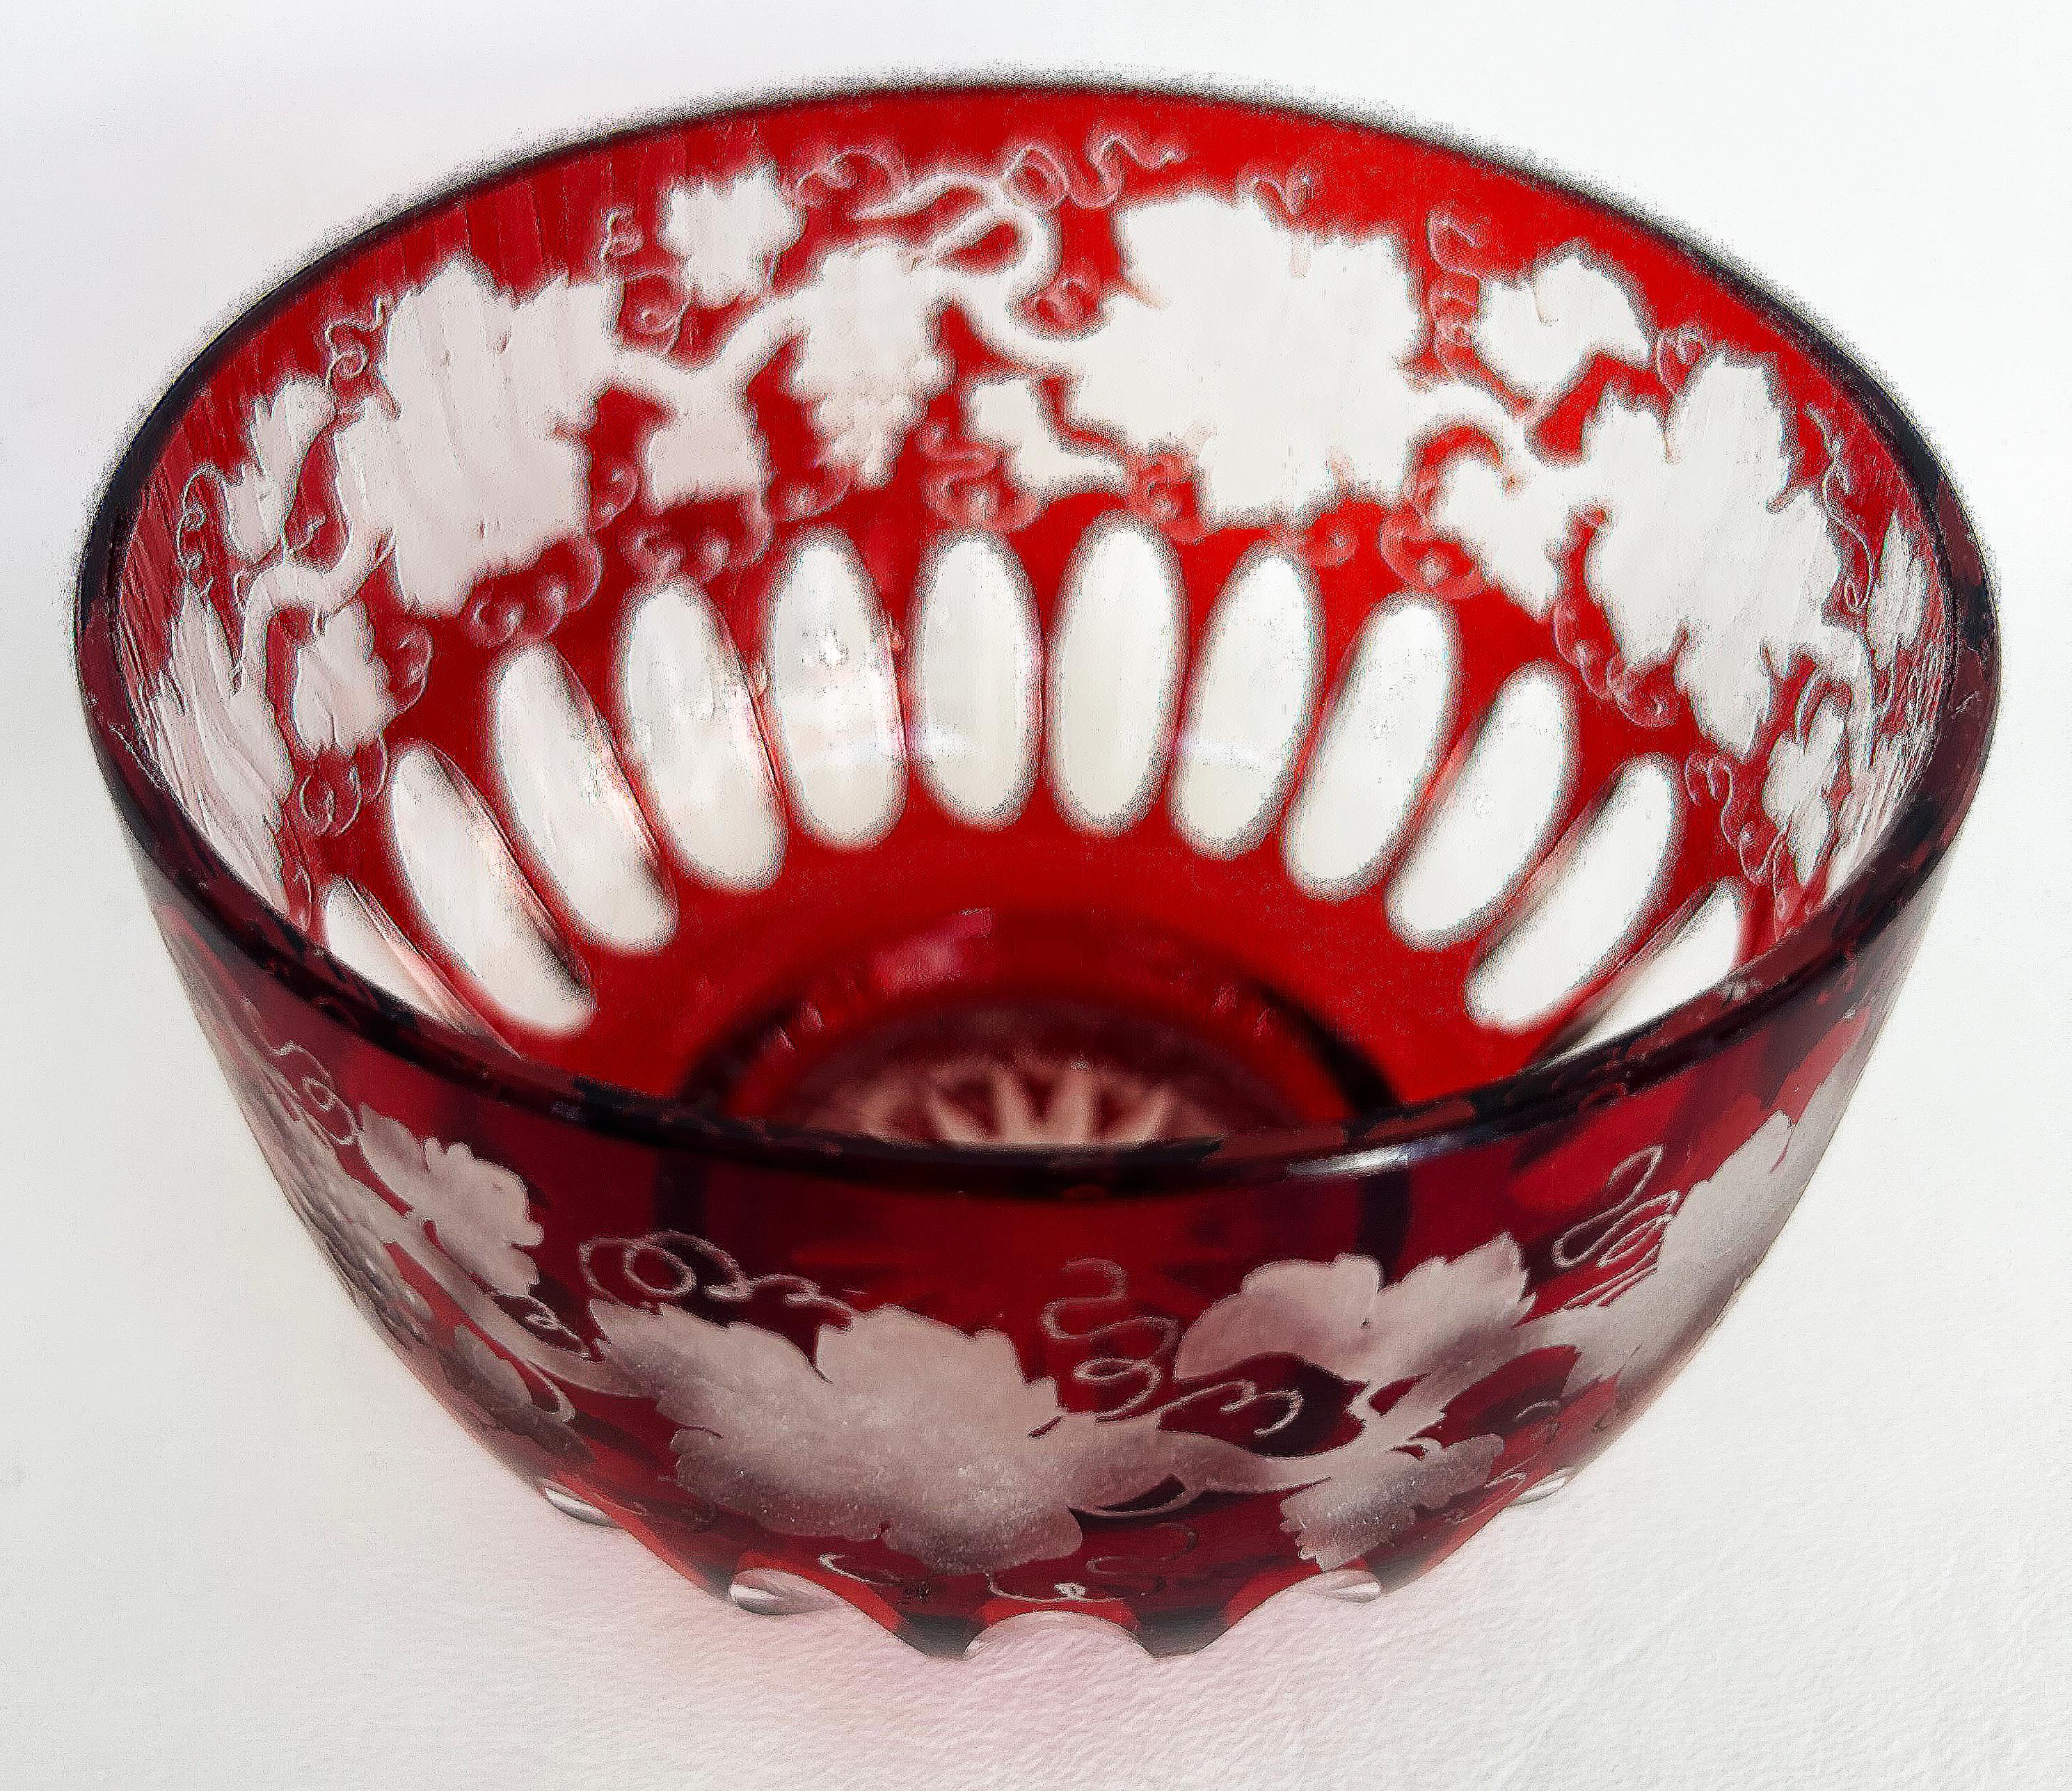 Bohemian Etched Cased Cranberry Glass Leaf and Vine Bowl

Offered for sale is an ornately carved Bohemian cranberry to clear etched and wheel-cut bowl. This finely carved bowl is surrounded by delicate vines and leaves with polished inverted oval